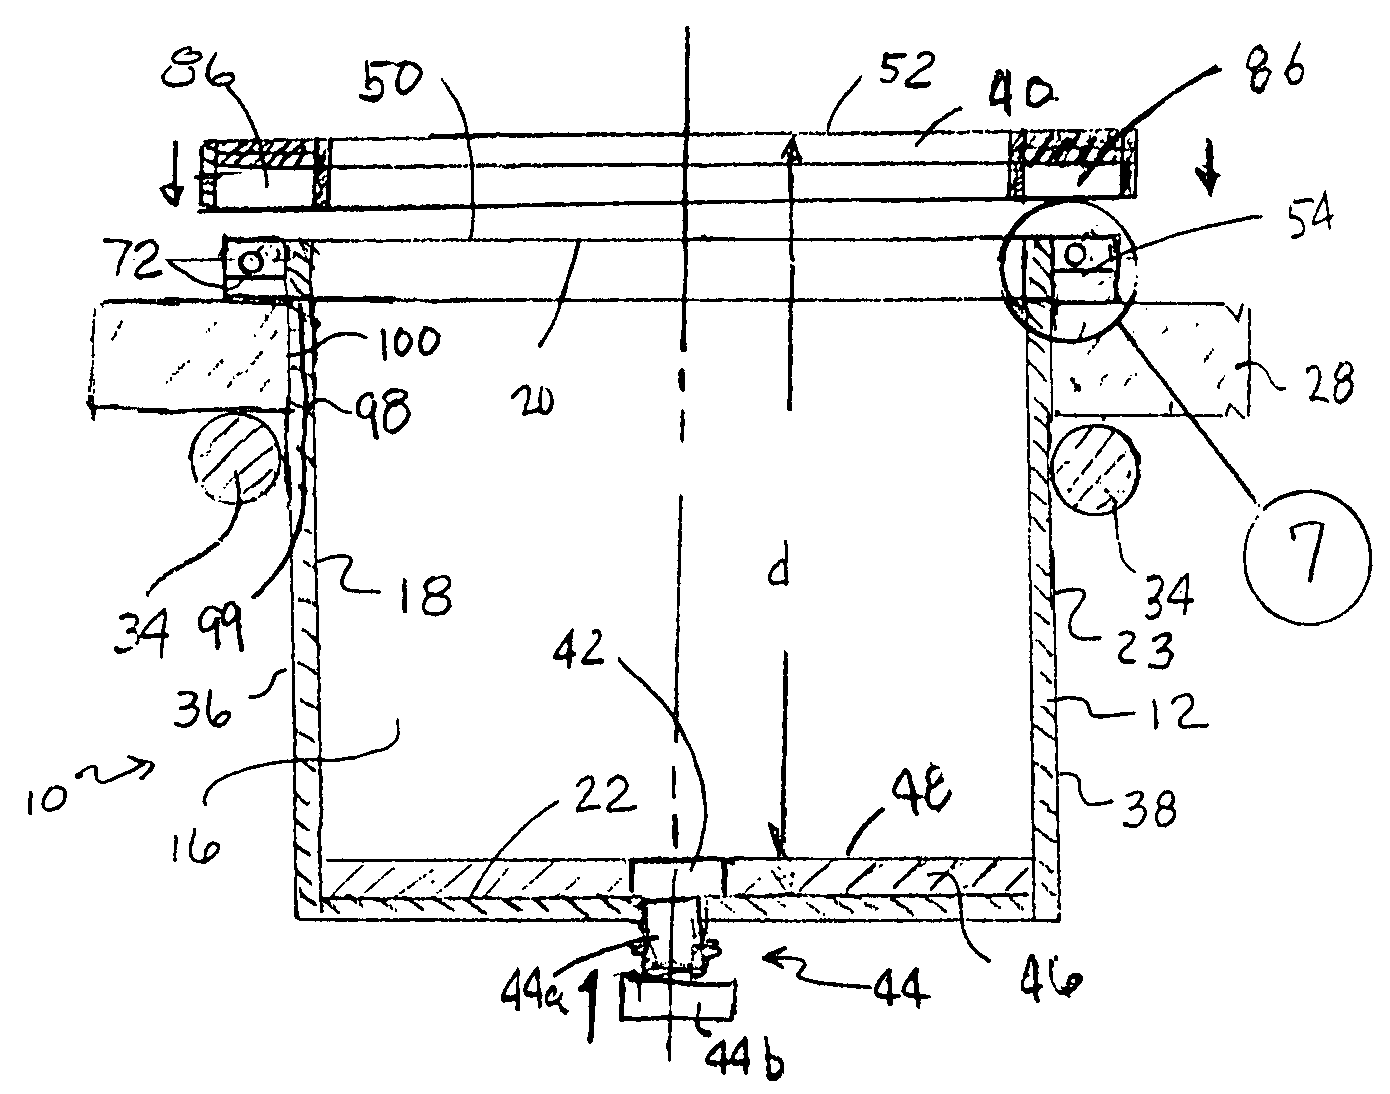 Holder for a containerized beverage